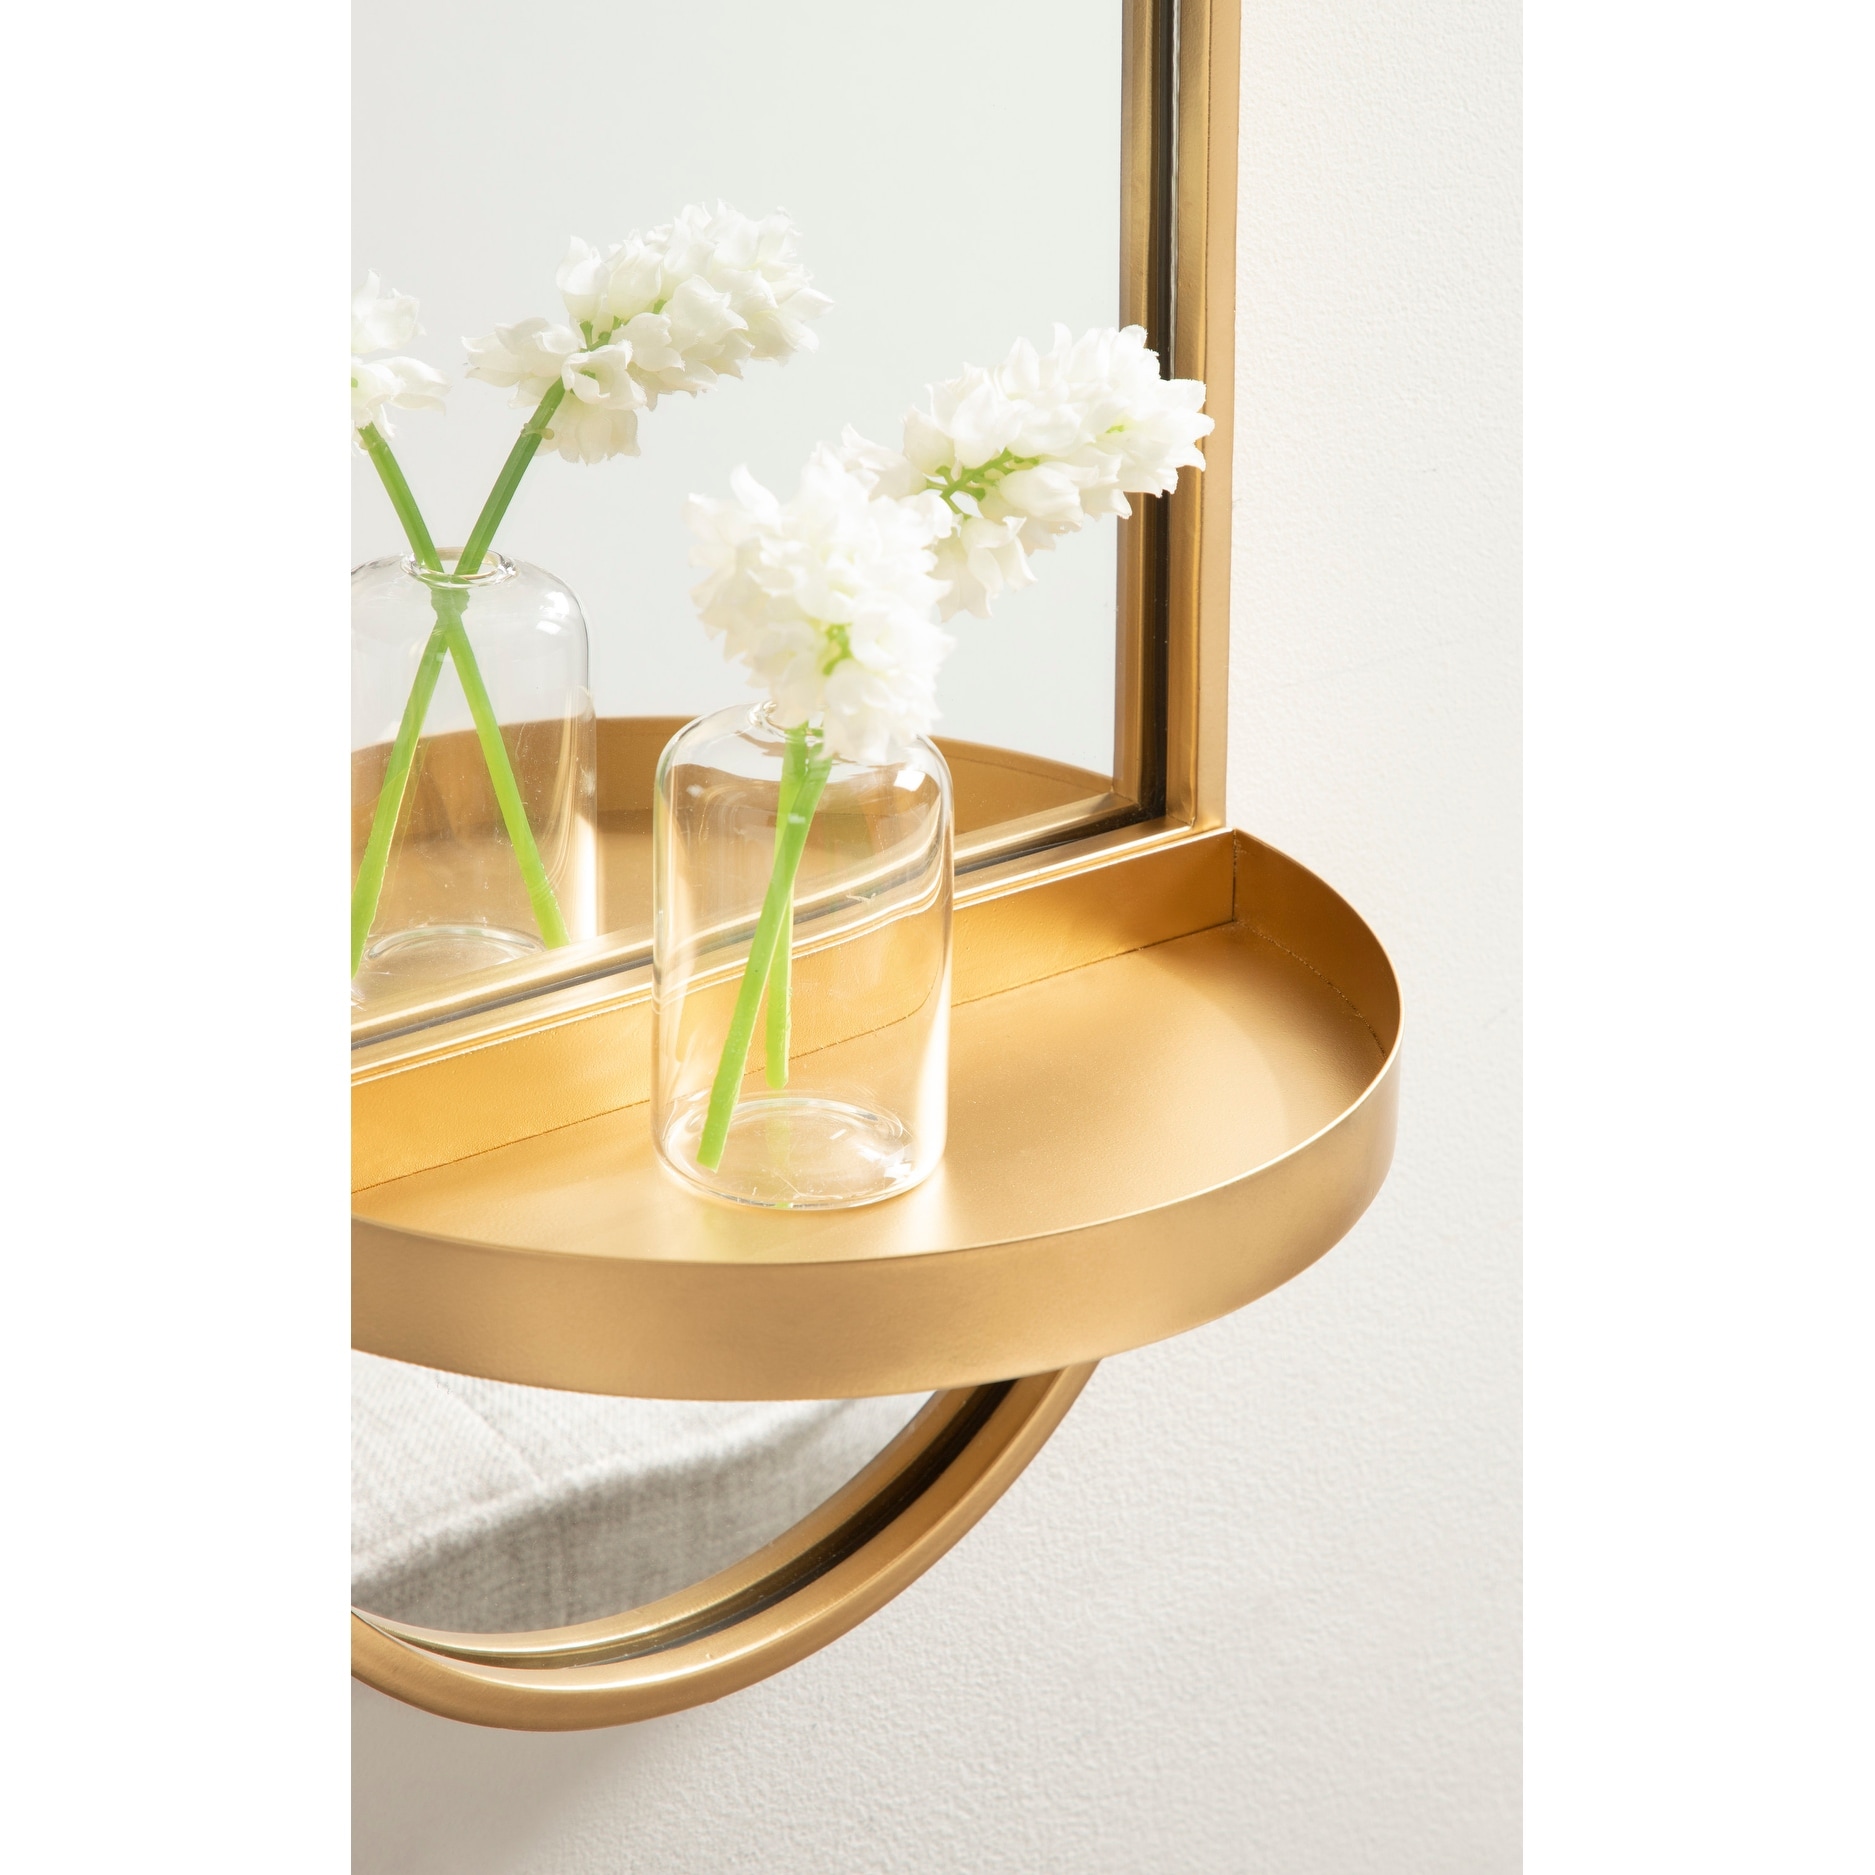 Kate and Laurel Estero Metal Oval Wall Mirror with Shelf Bed Bath   Beyond 25897131